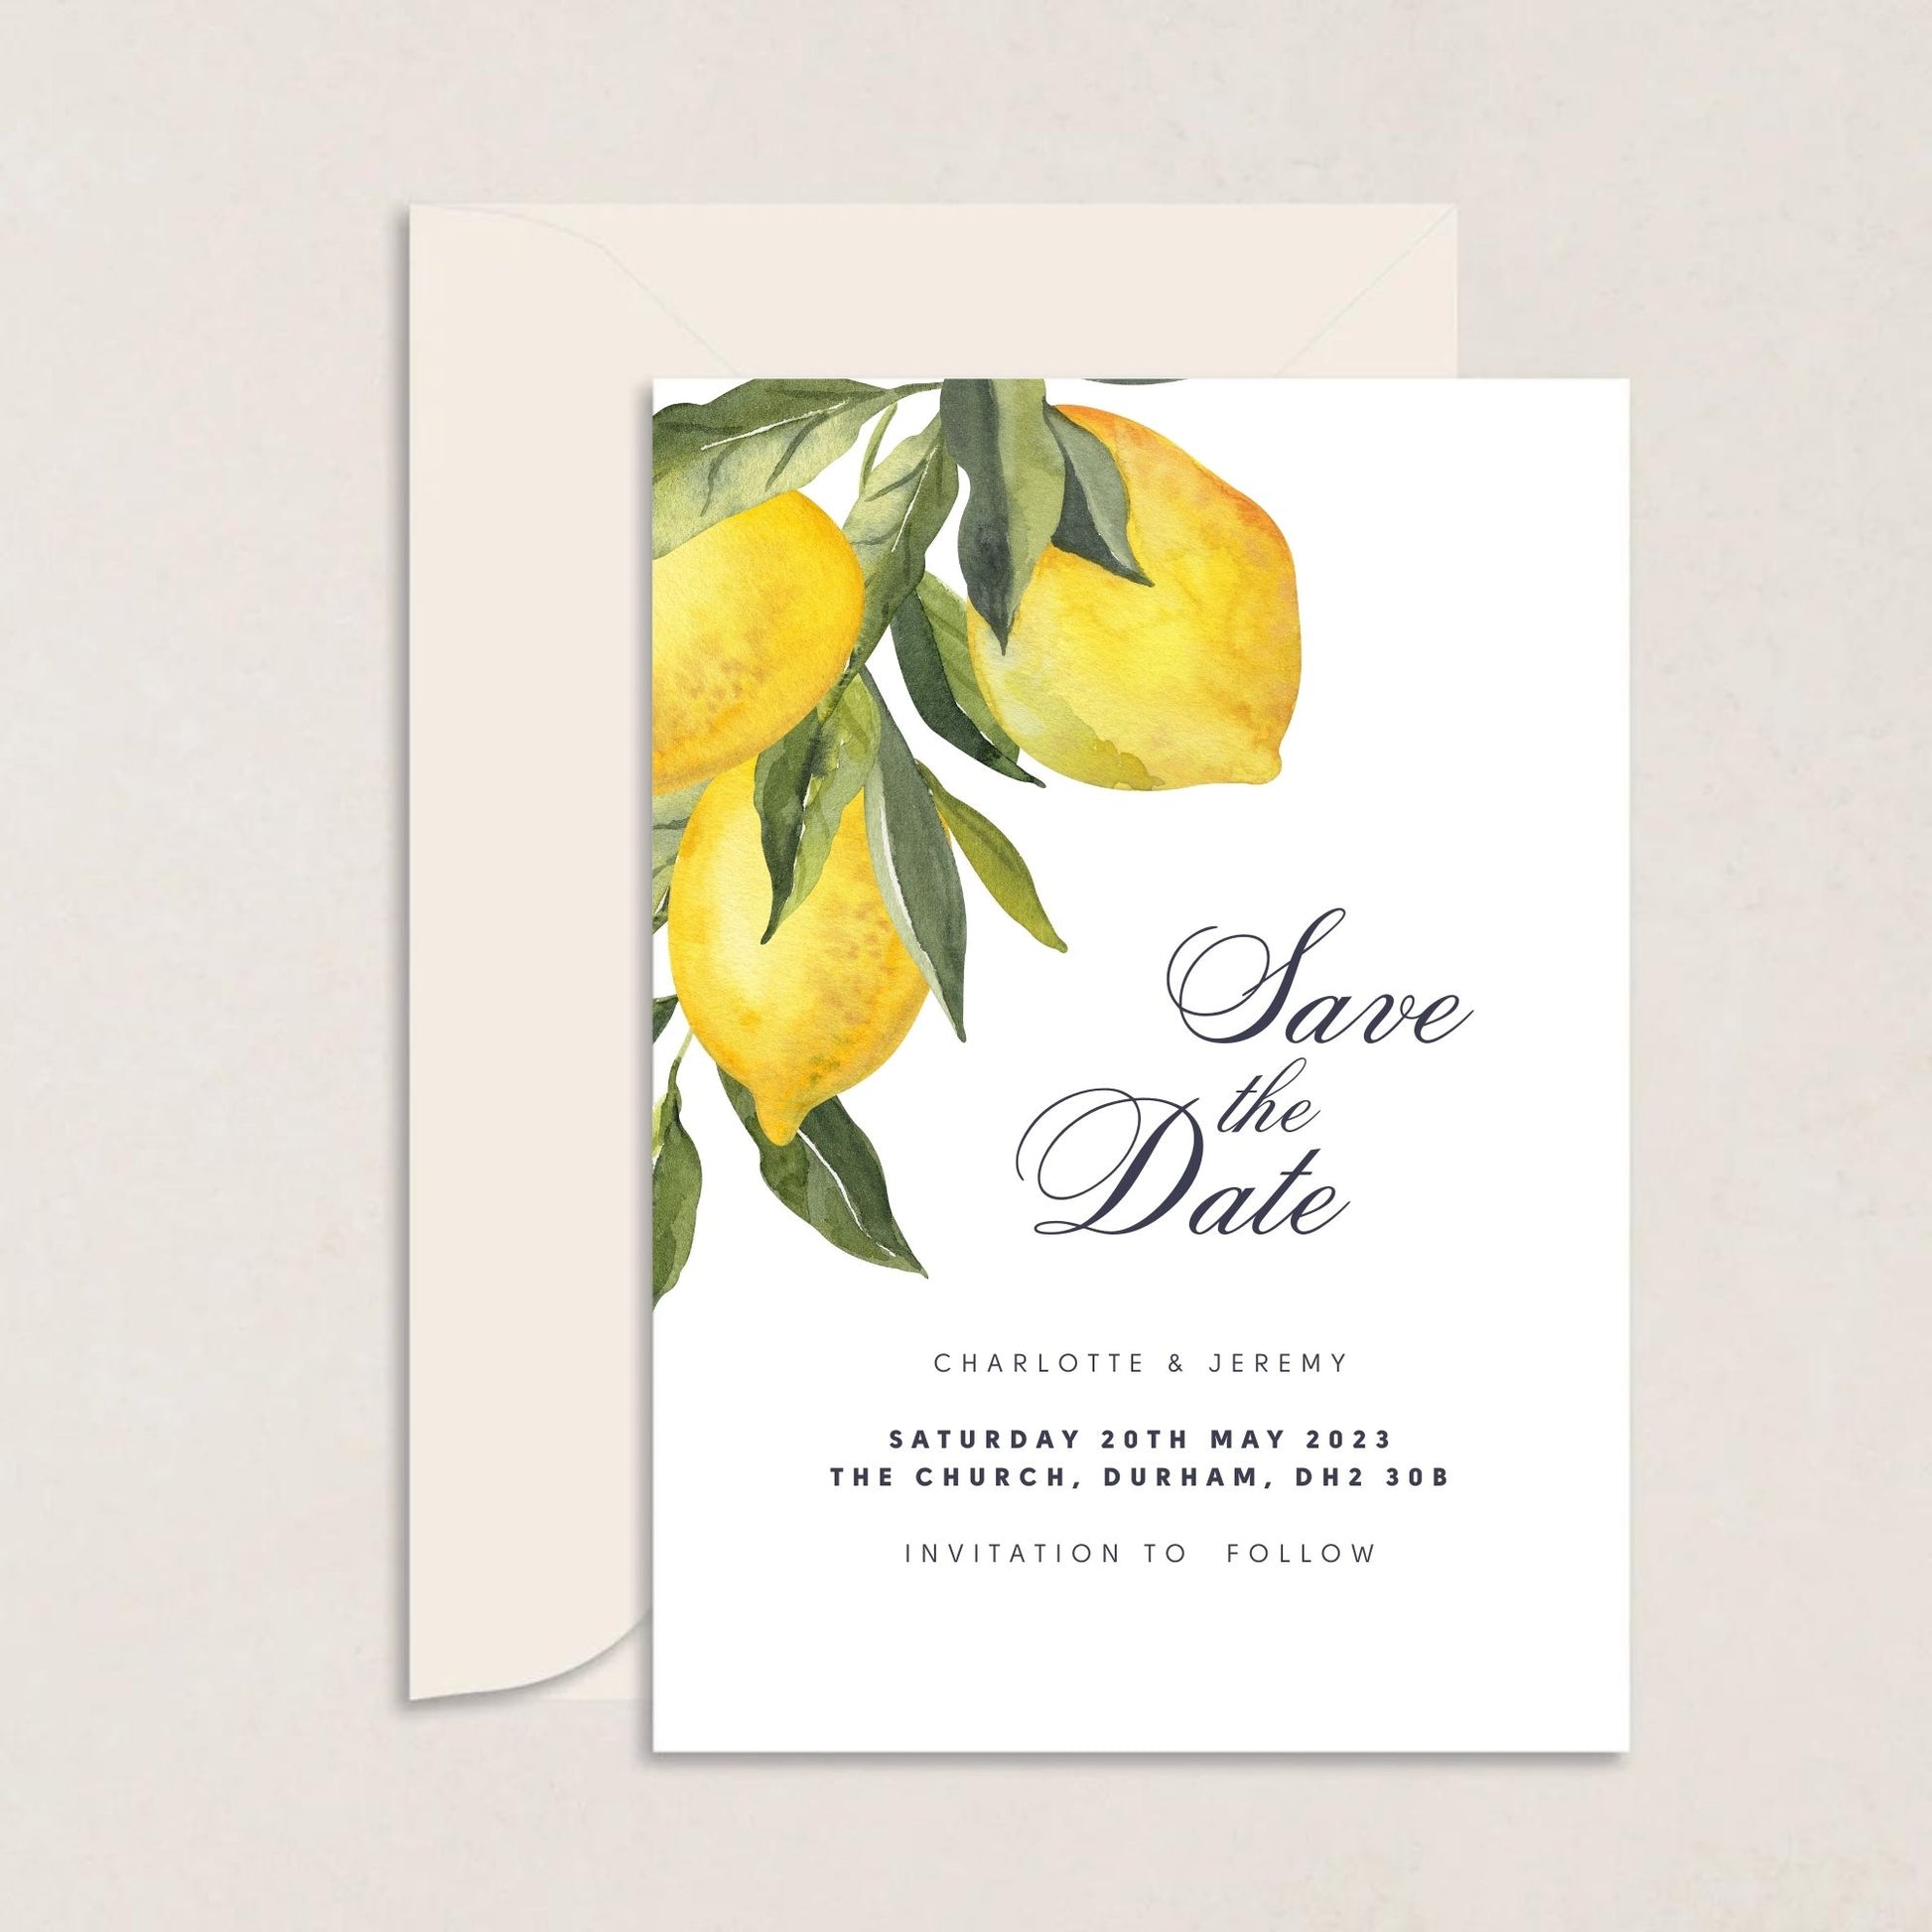 CHARLOTTE Wedding Save the Date - Wedding Invitations available at The Ivy Collection | Luxury Wedding Stationery